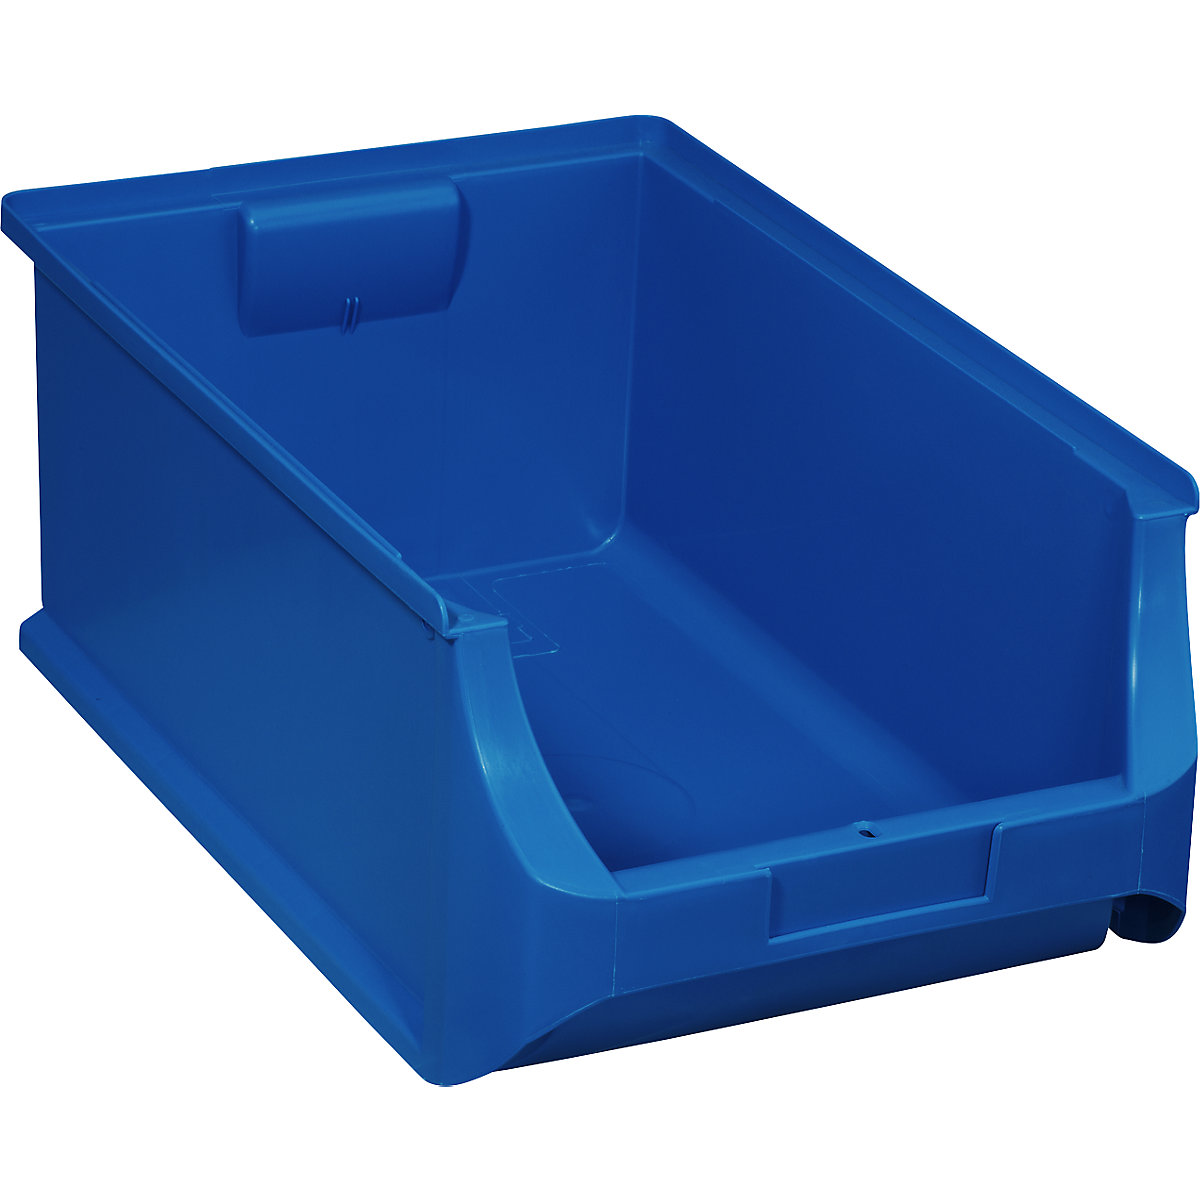 Open fronted storage bin made from 100% recycled PP